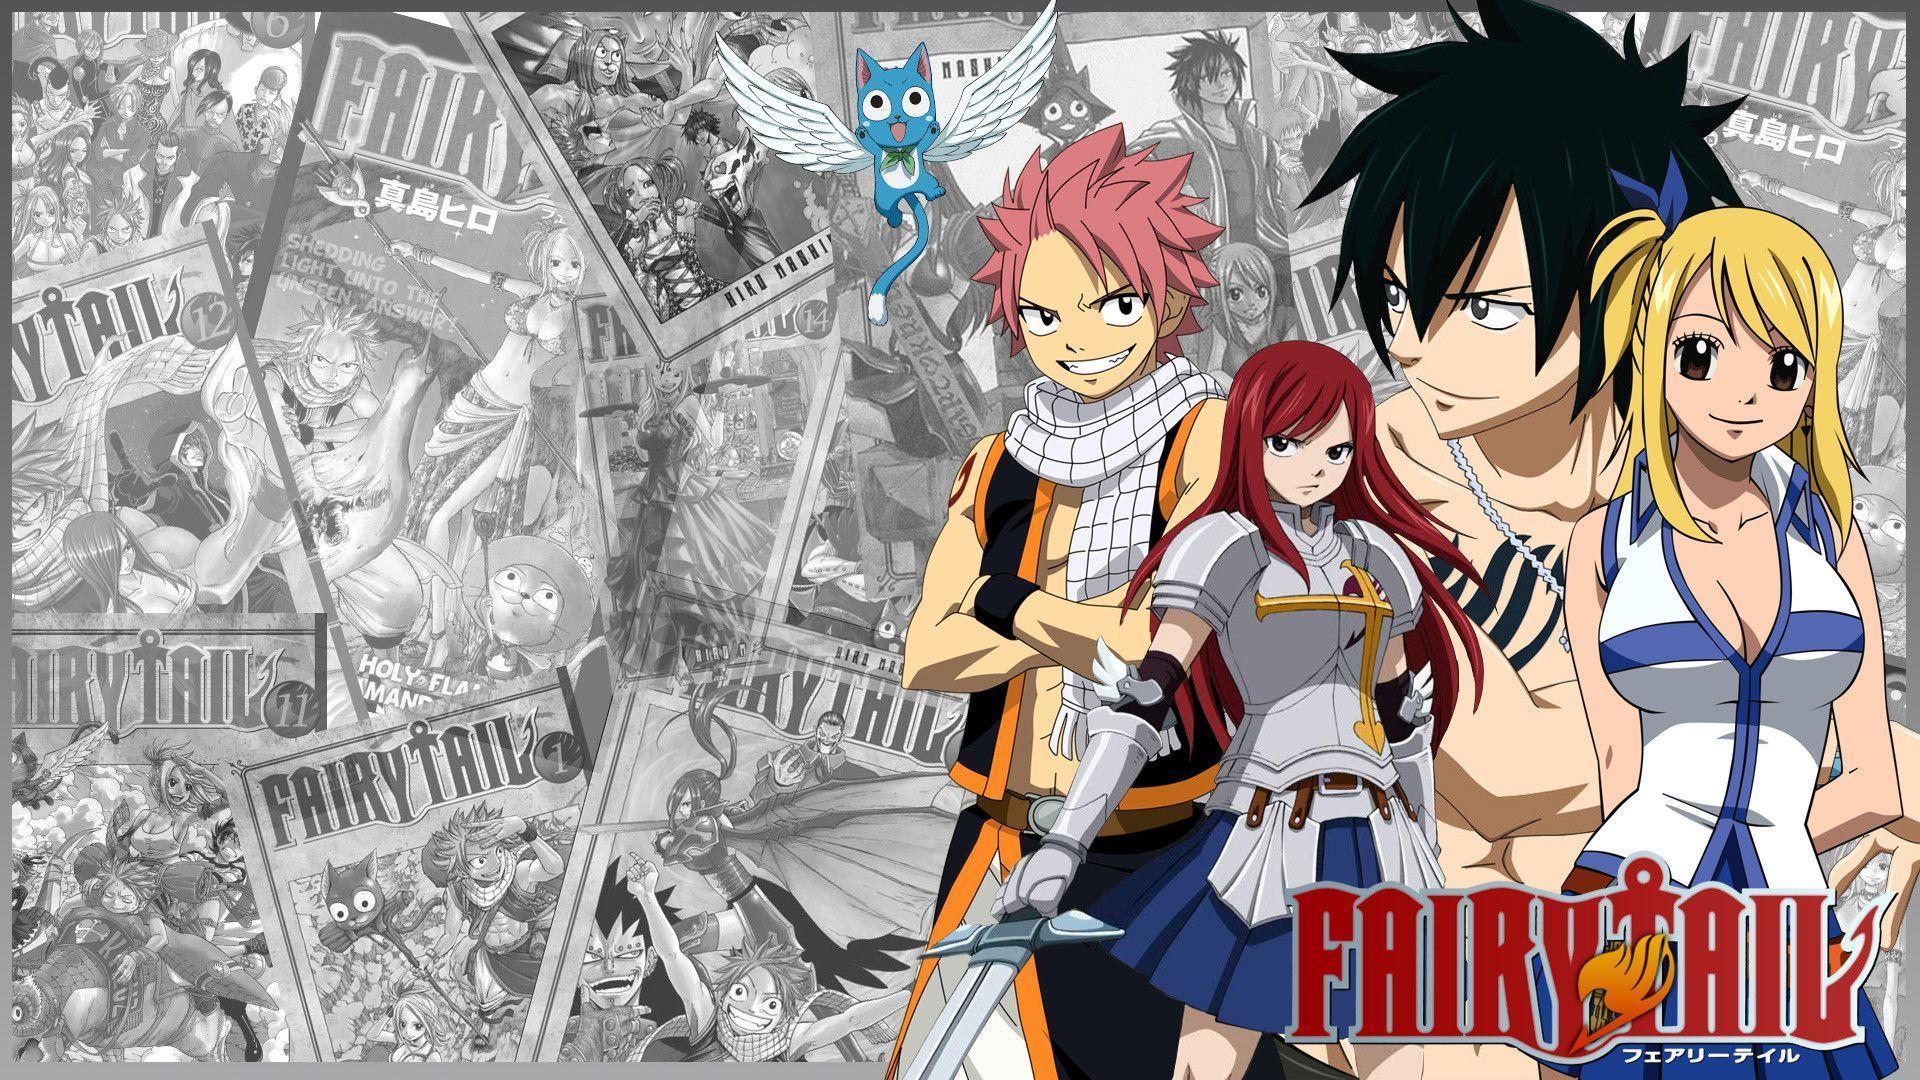 Anime Fairy Tail HD Wallpaper by themnaxs